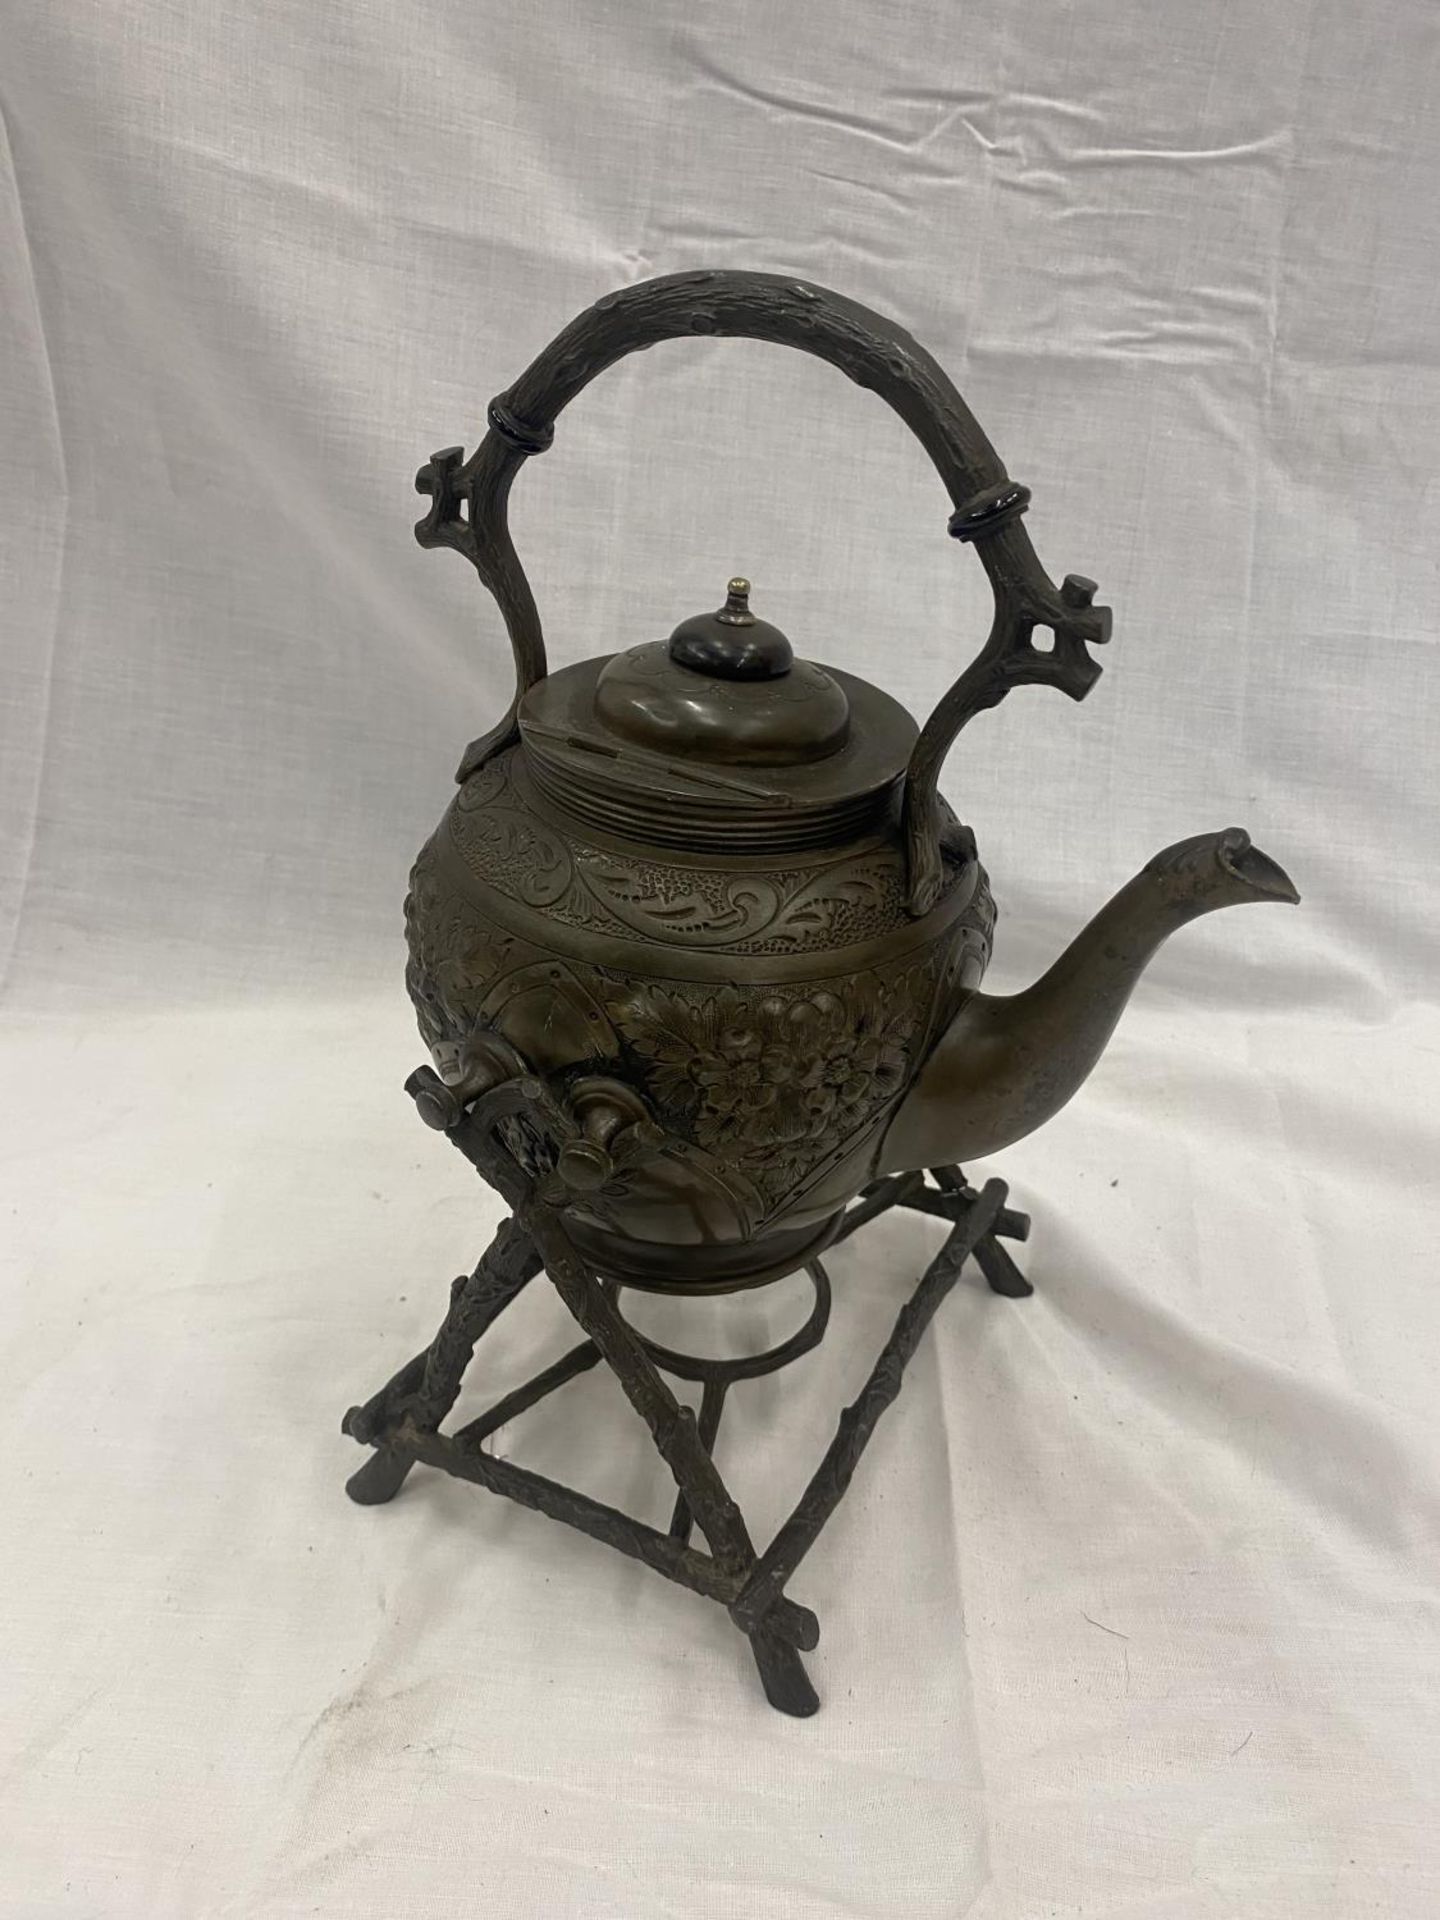 AN ORNATE METAL SPIRIT KETTLE AND STAND - Image 2 of 2